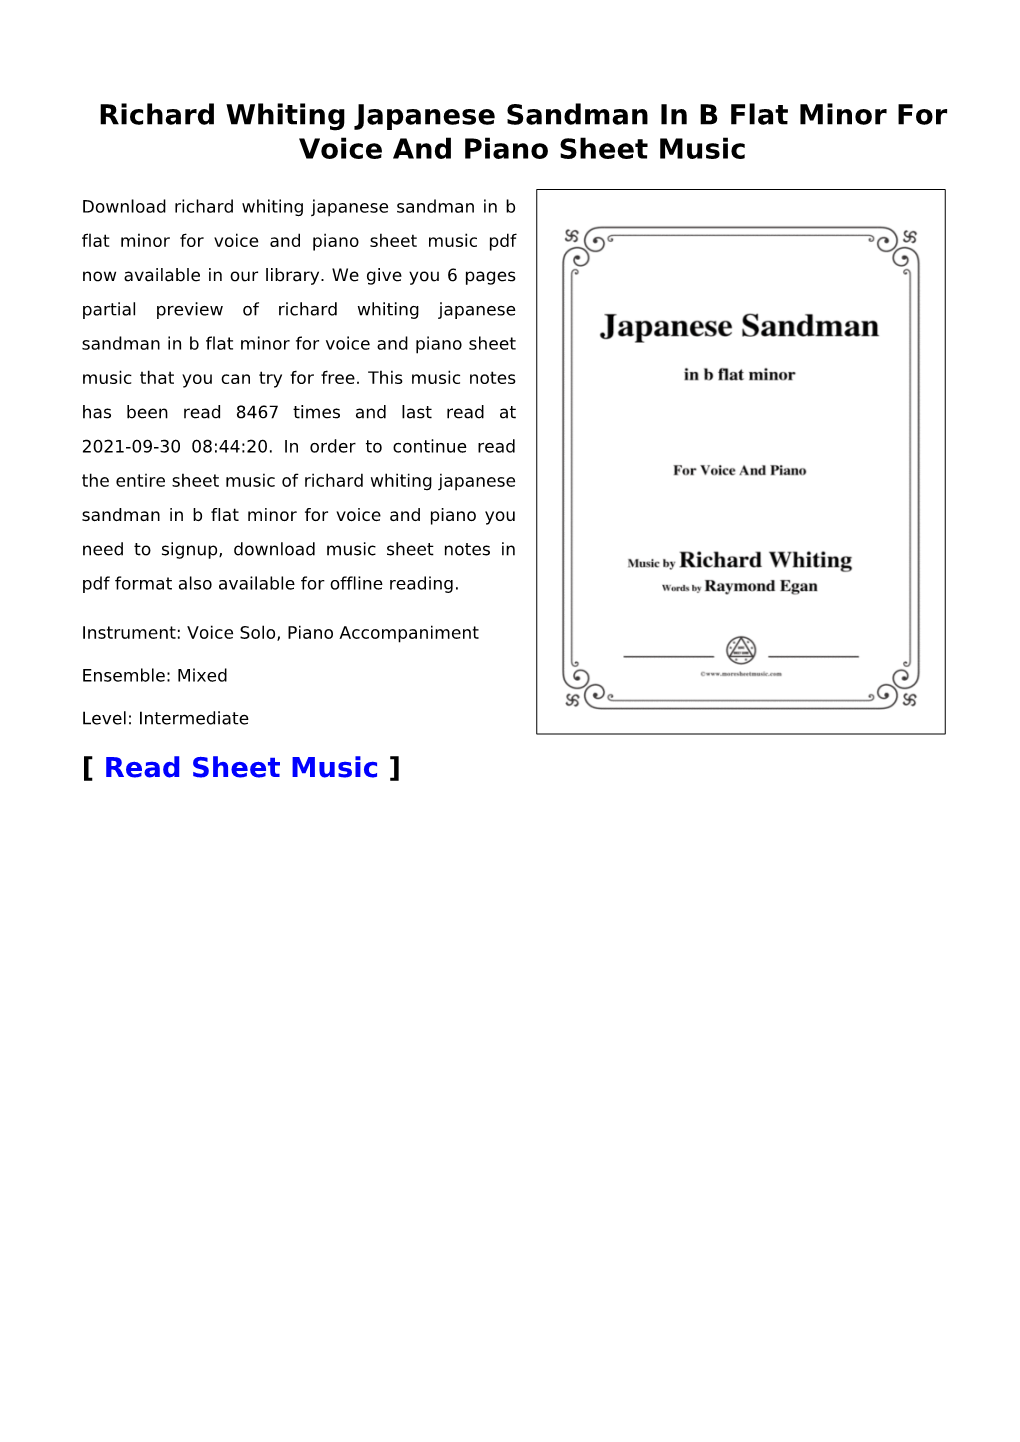 Richard Whiting Japanese Sandman in B Flat Minor for Voice and Piano Sheet Music